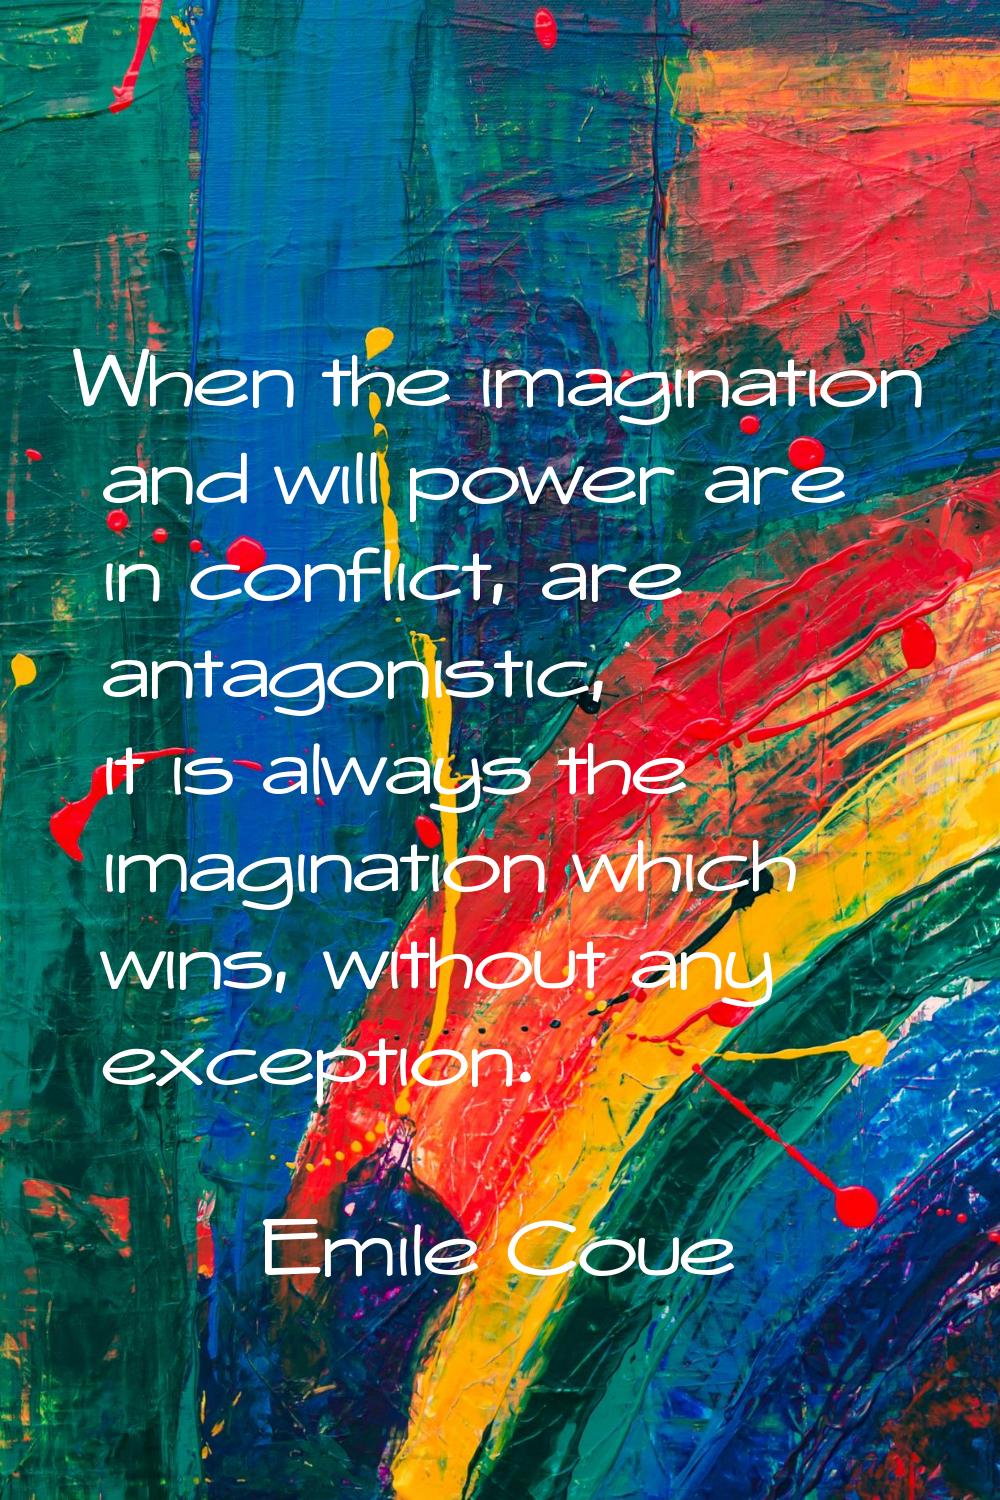 When the imagination and will power are in conflict, are antagonistic, it is always the imagination